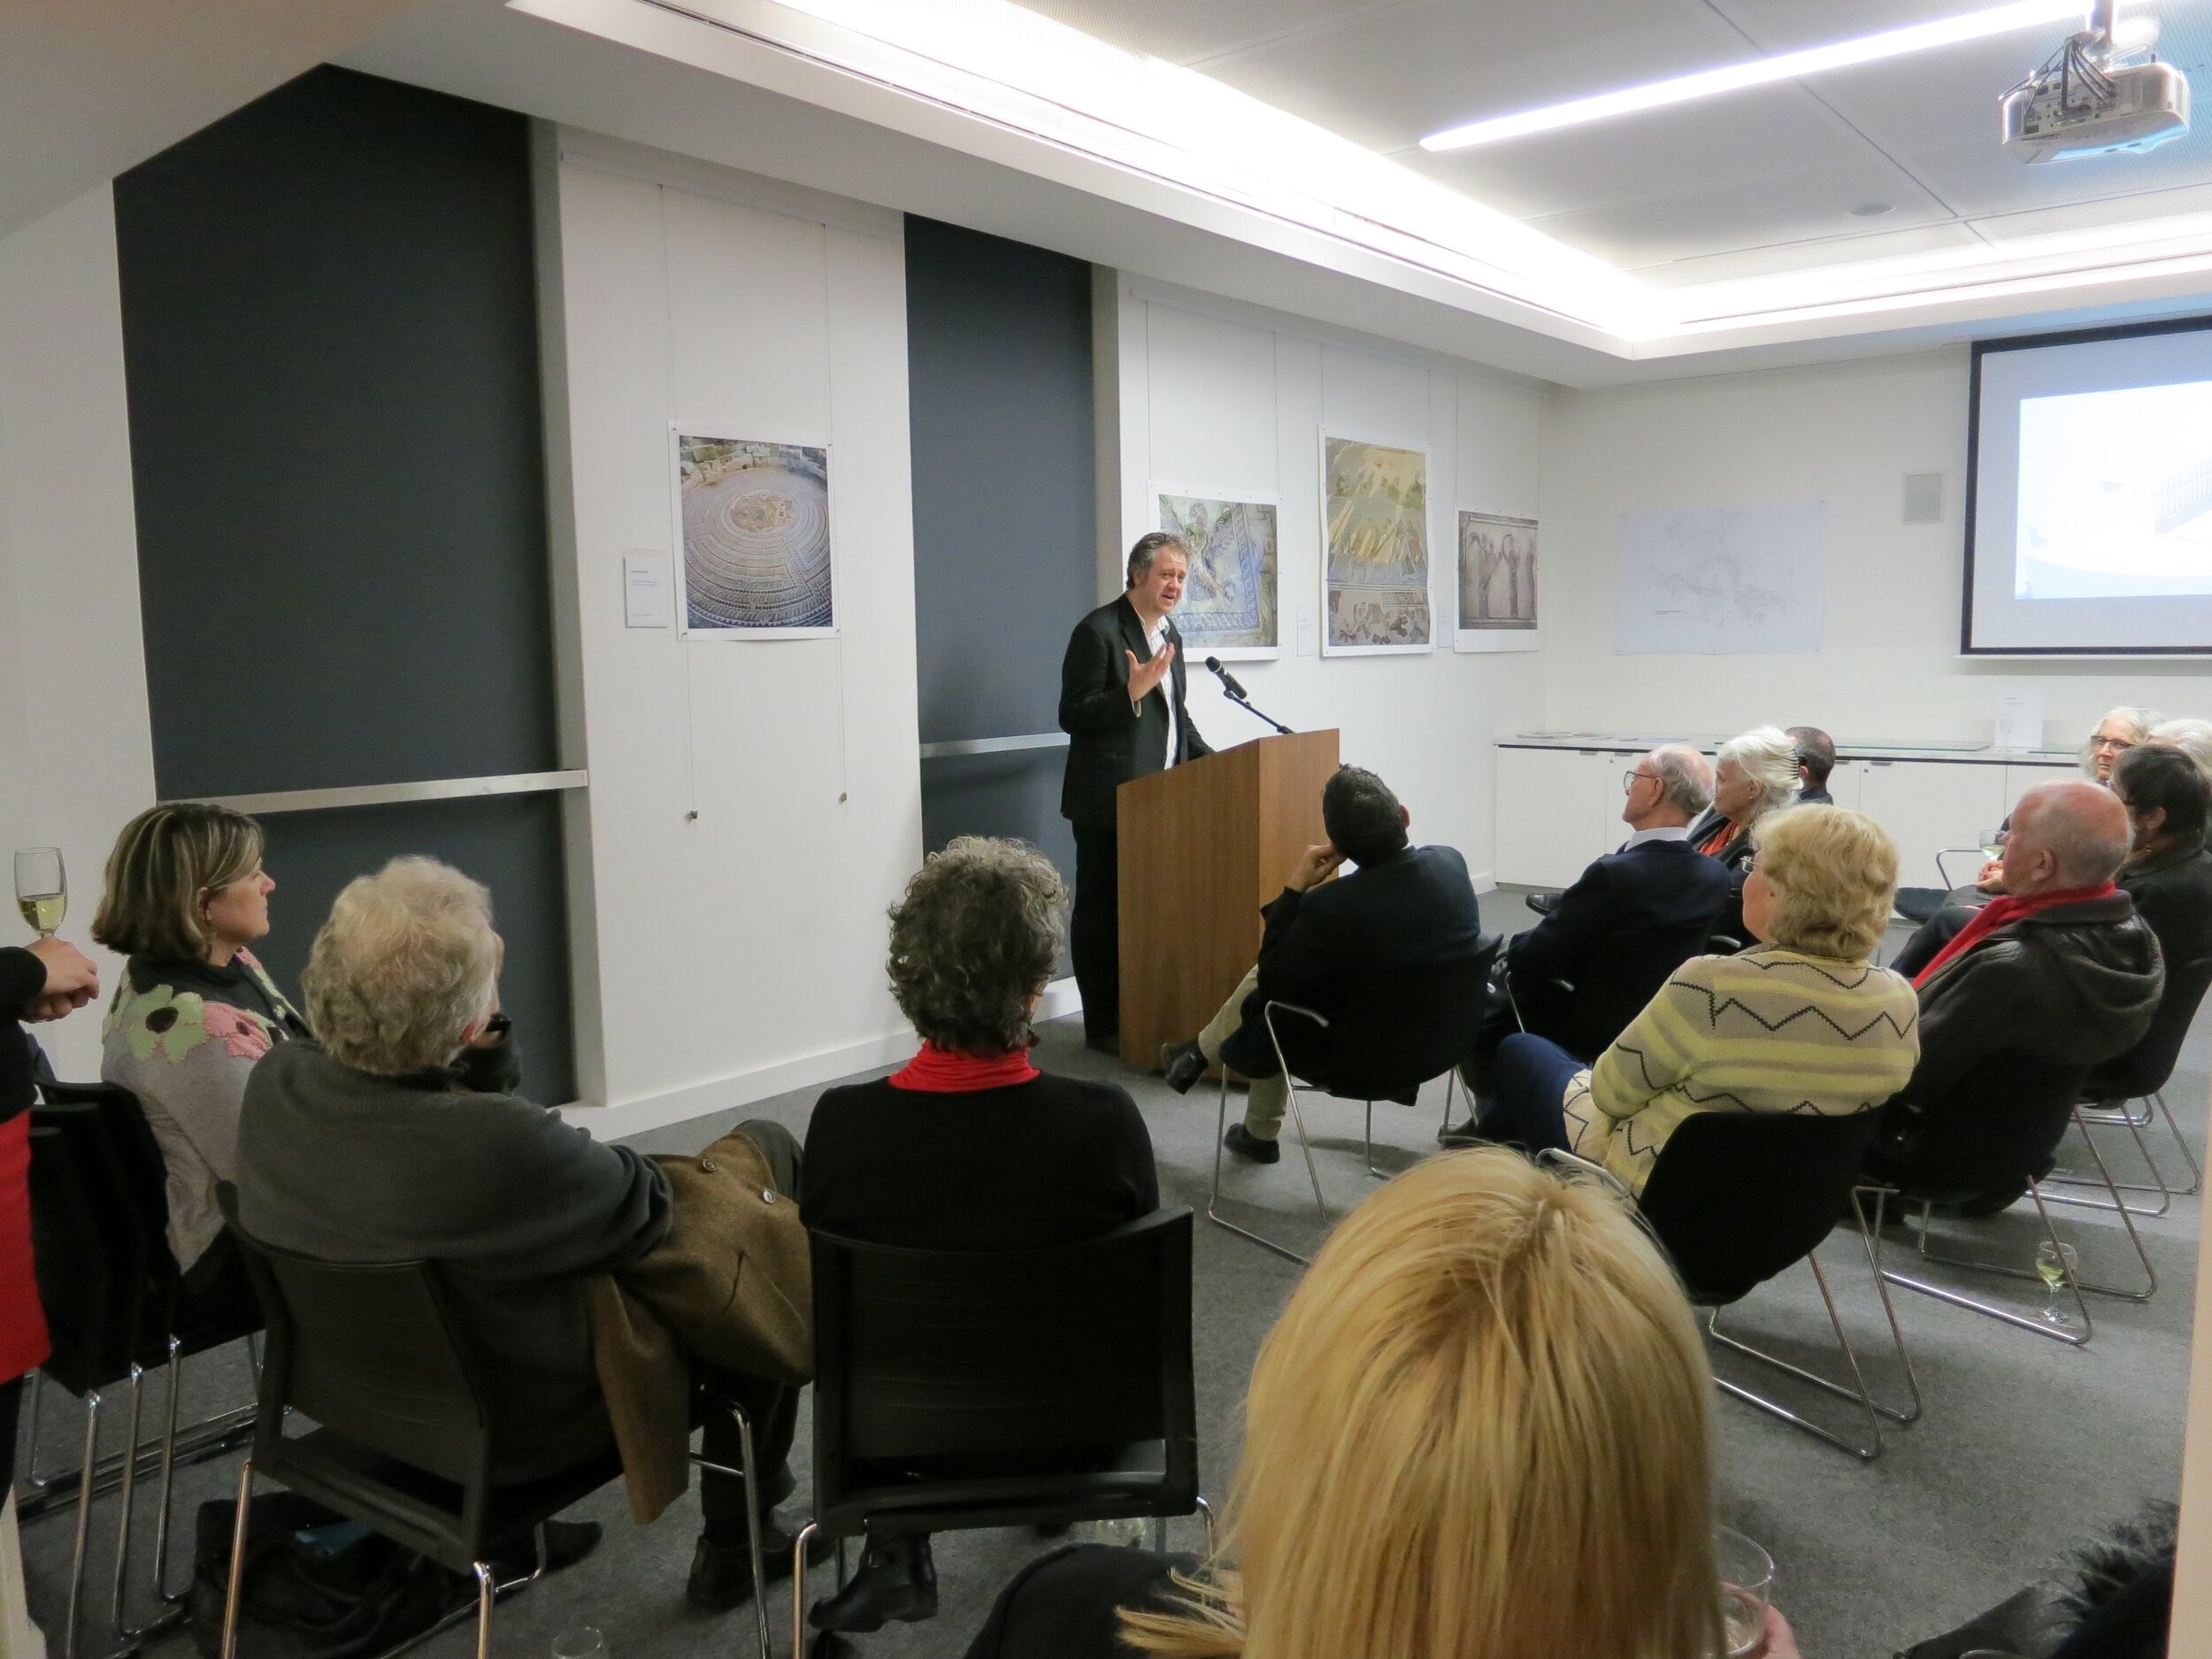  Dr. Craig Barker speaking at the opening of  Response to Cyprus,  10 July 2013, hosted by the Australian Archaeological Institute at Athens (AAIA) at the Centre of Classical and Near Eastern Studies of Australia (CCANESA). Works by Derek Kreckler ar